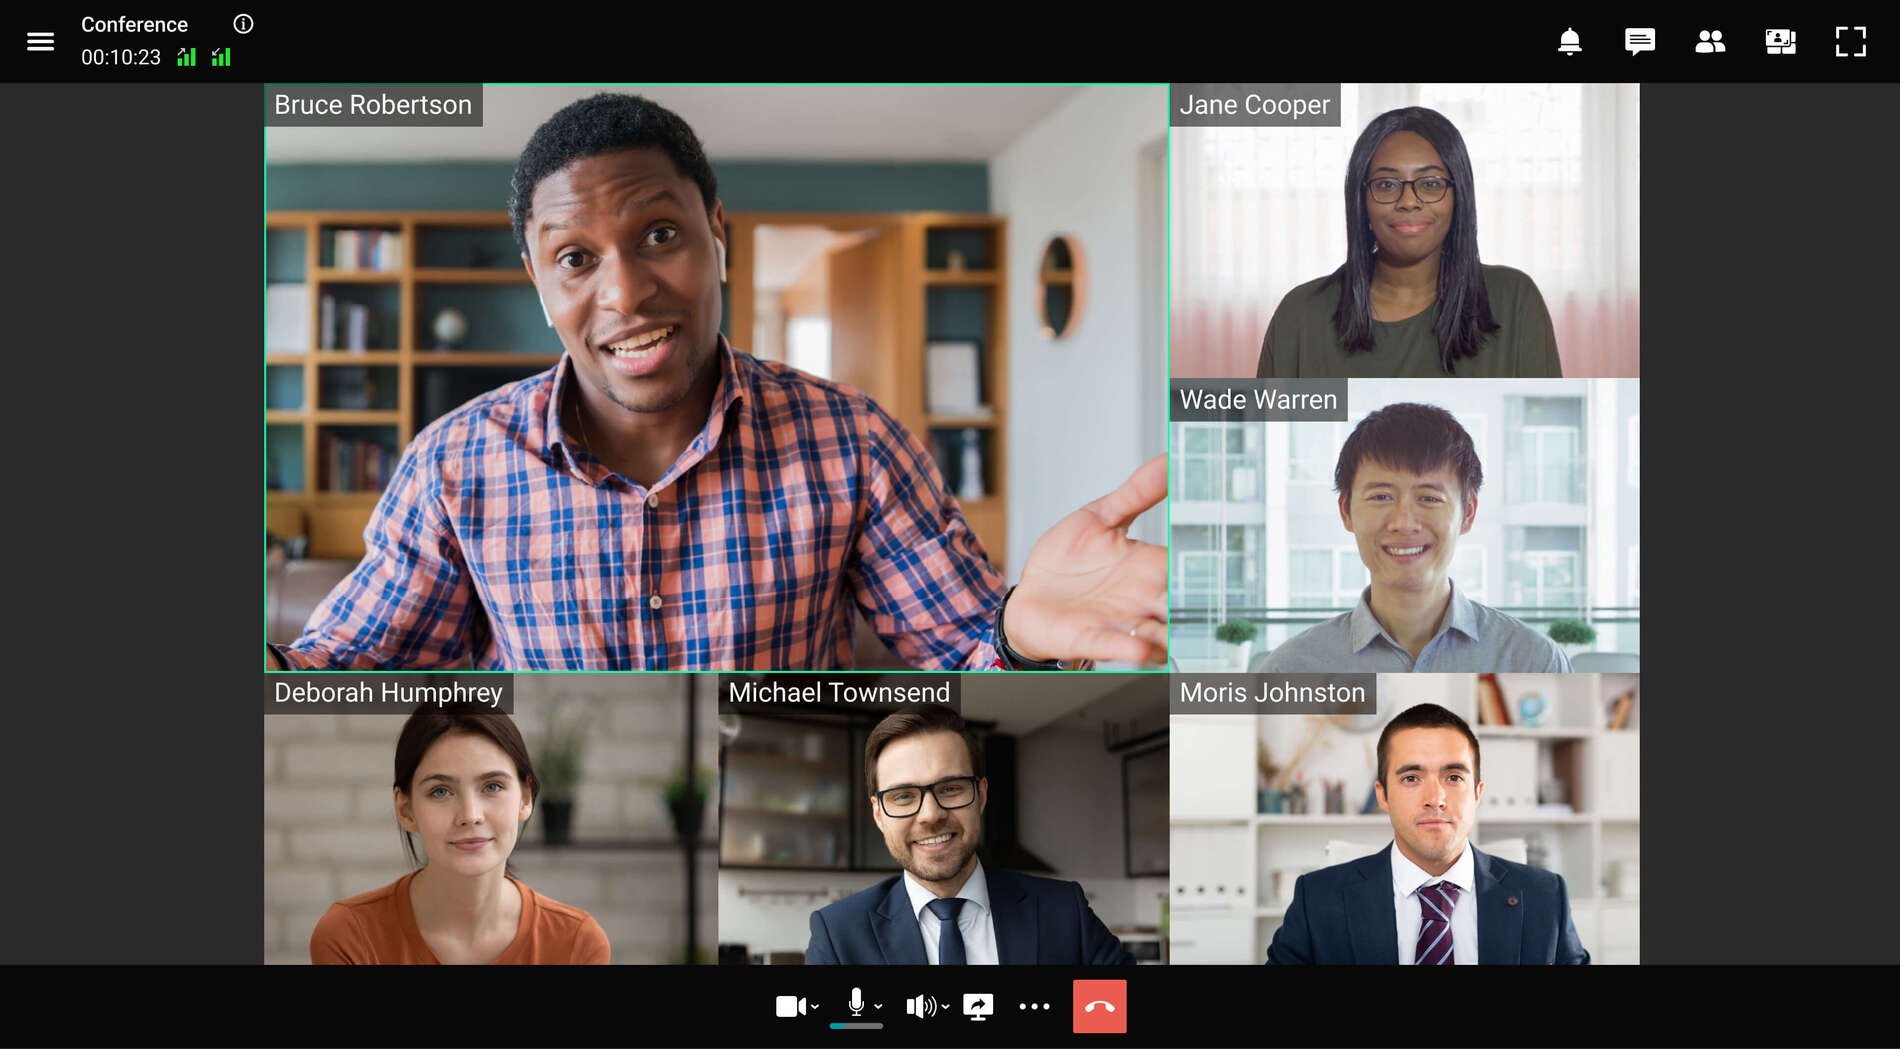 Communication Channels - Video conferencing